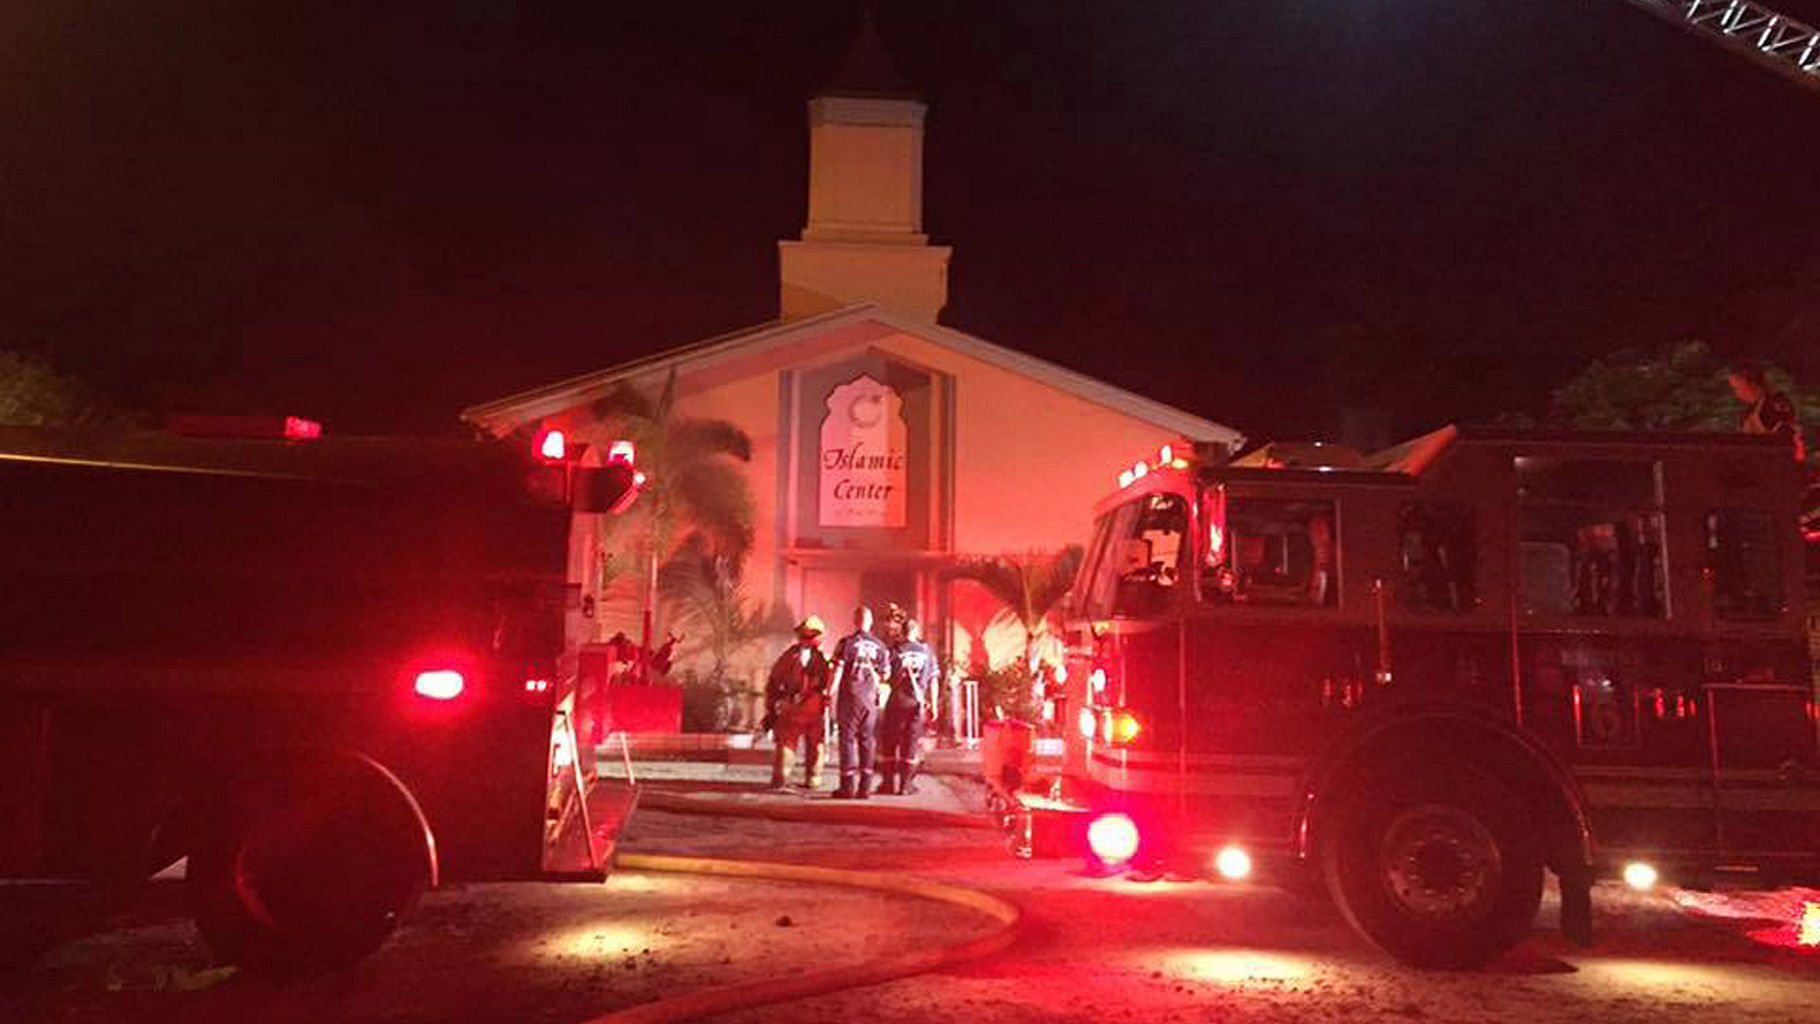 Firefighters work at the scene of a fire at the Islamic Center of Fort Pierce on Monday. (Photo: AP)